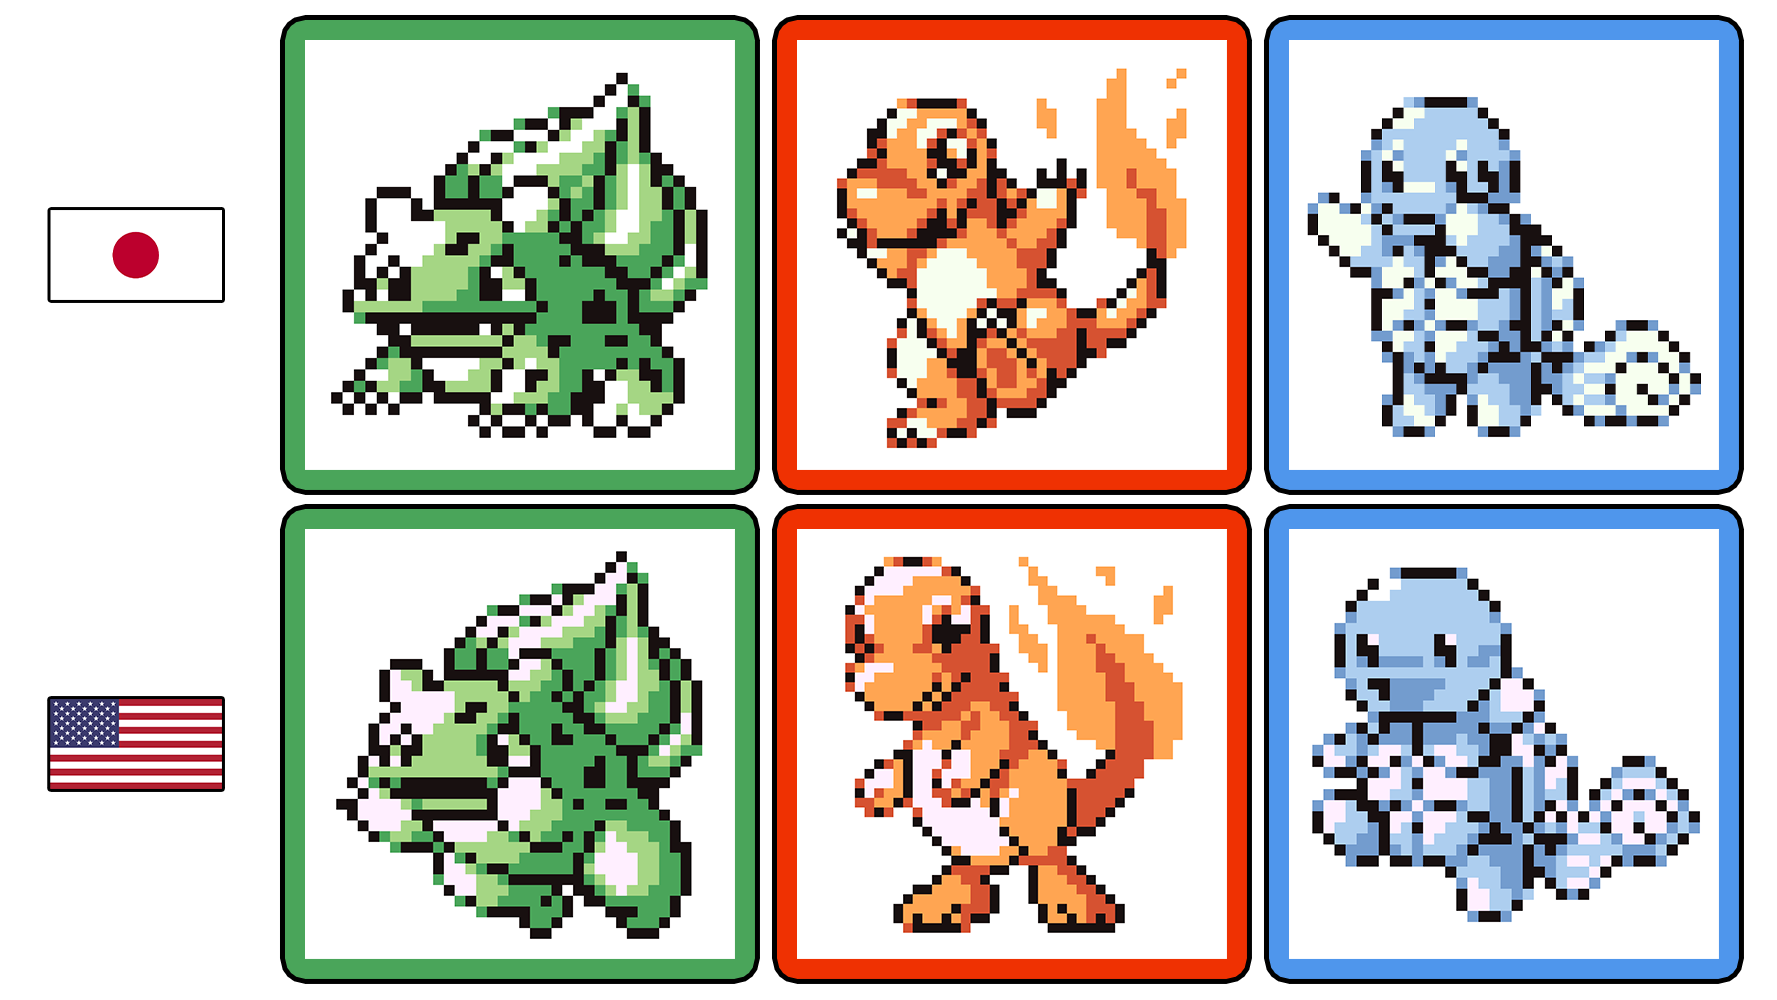 Dr. Lava on X: Starters Around the World: When Japanese fans booted up Red  & Green for the very first time, their choice in starter Pokemon were  represented by completely different sprites